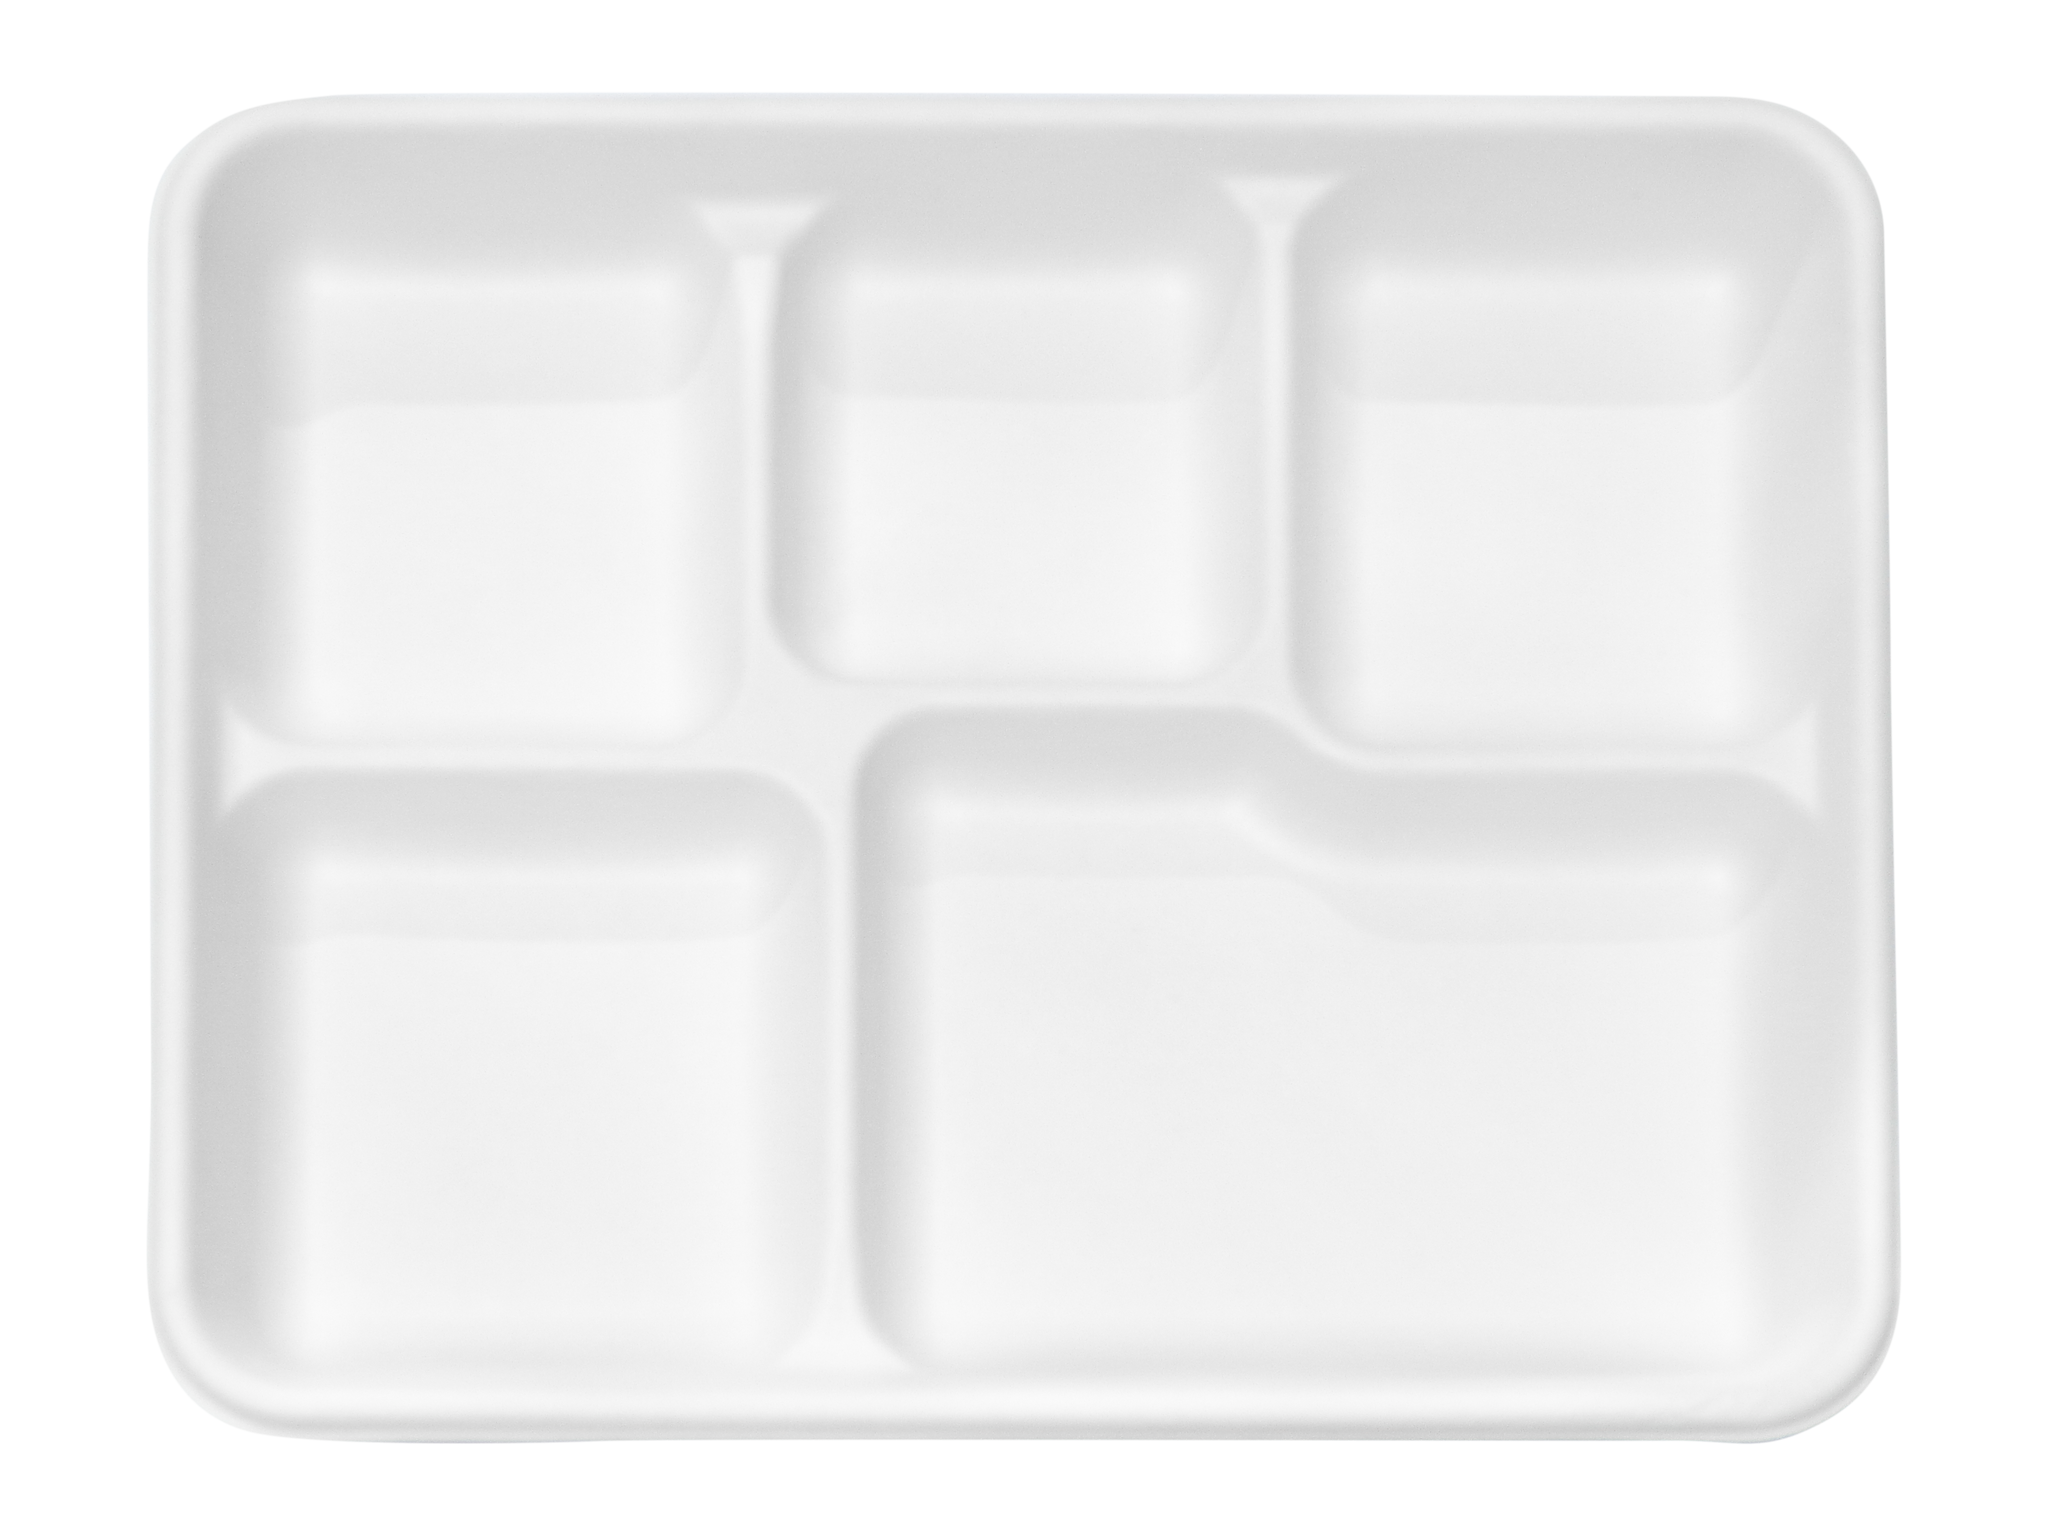 200 Pack] 5-Compartment Sugarcane Fiber Disposable Tray - 100% Compostable  American Tray, Serving Tray, Cafeteria Tray, Biodegradable, Eco Friendly,  Tree Free by EcoQuality (10 x 8.3 x 0.9 inch) 